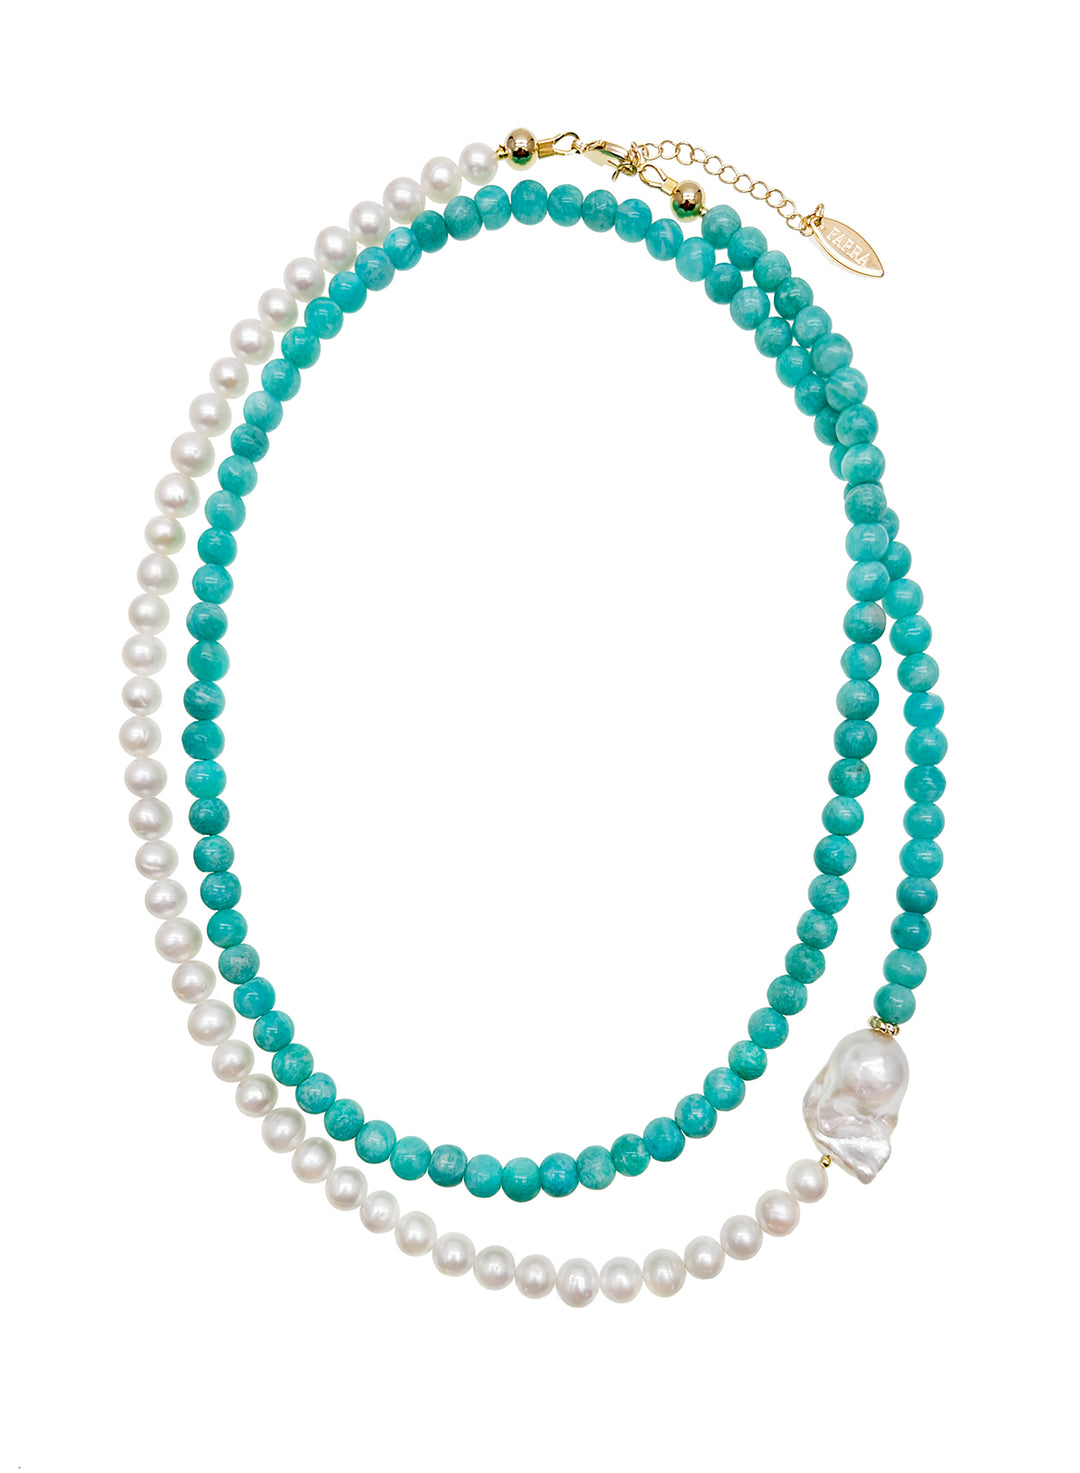 Freshwater Pearls and Amazonite Long Necklace JN058 - FARRA